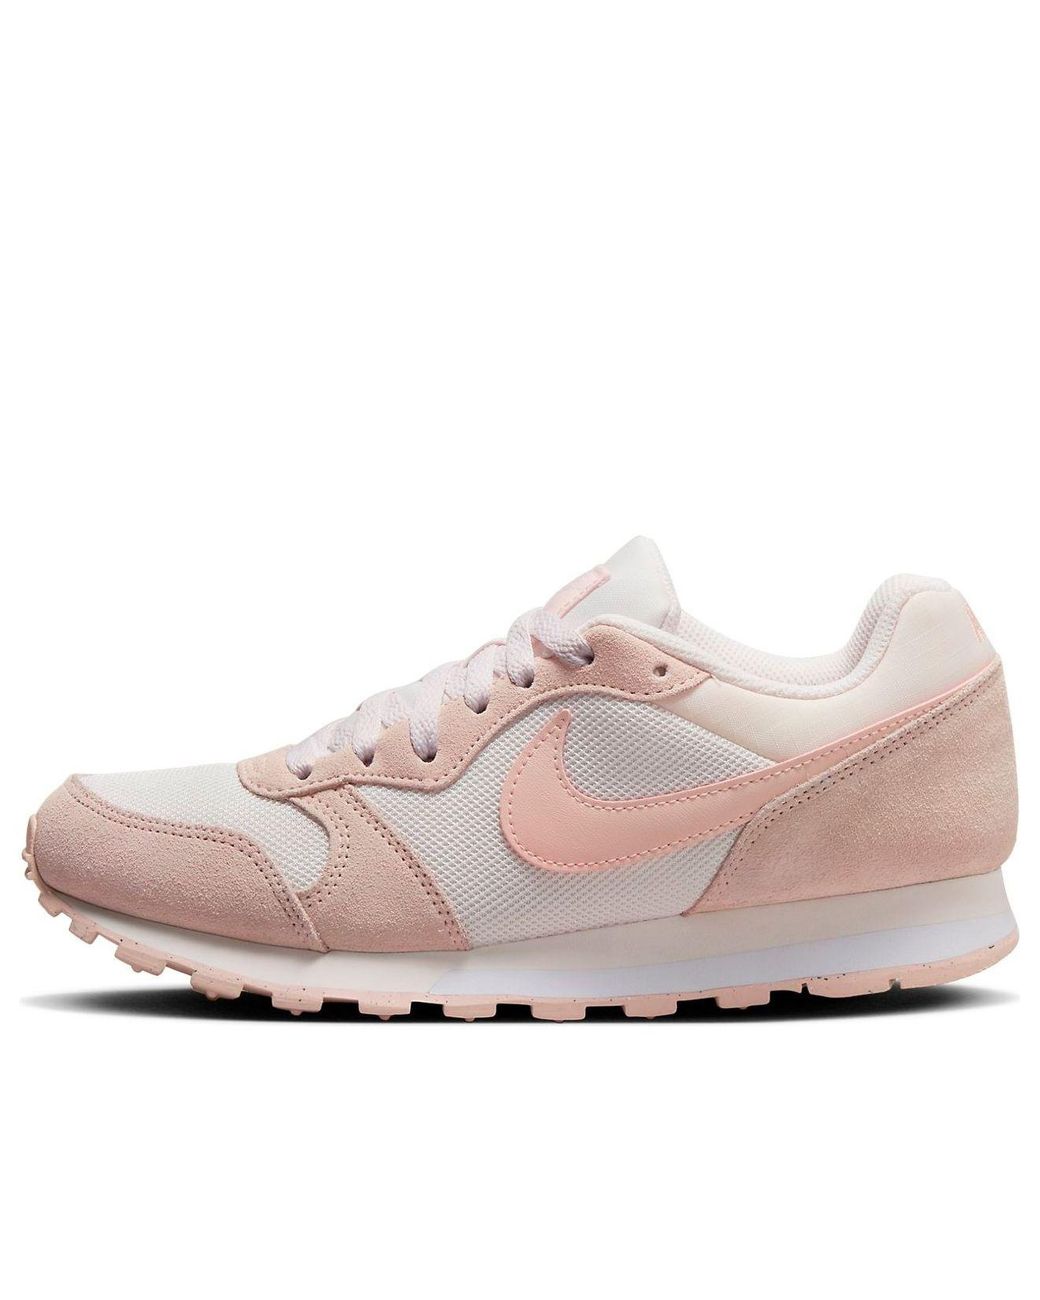 Nike Md Runner 2 in Pink | Lyst